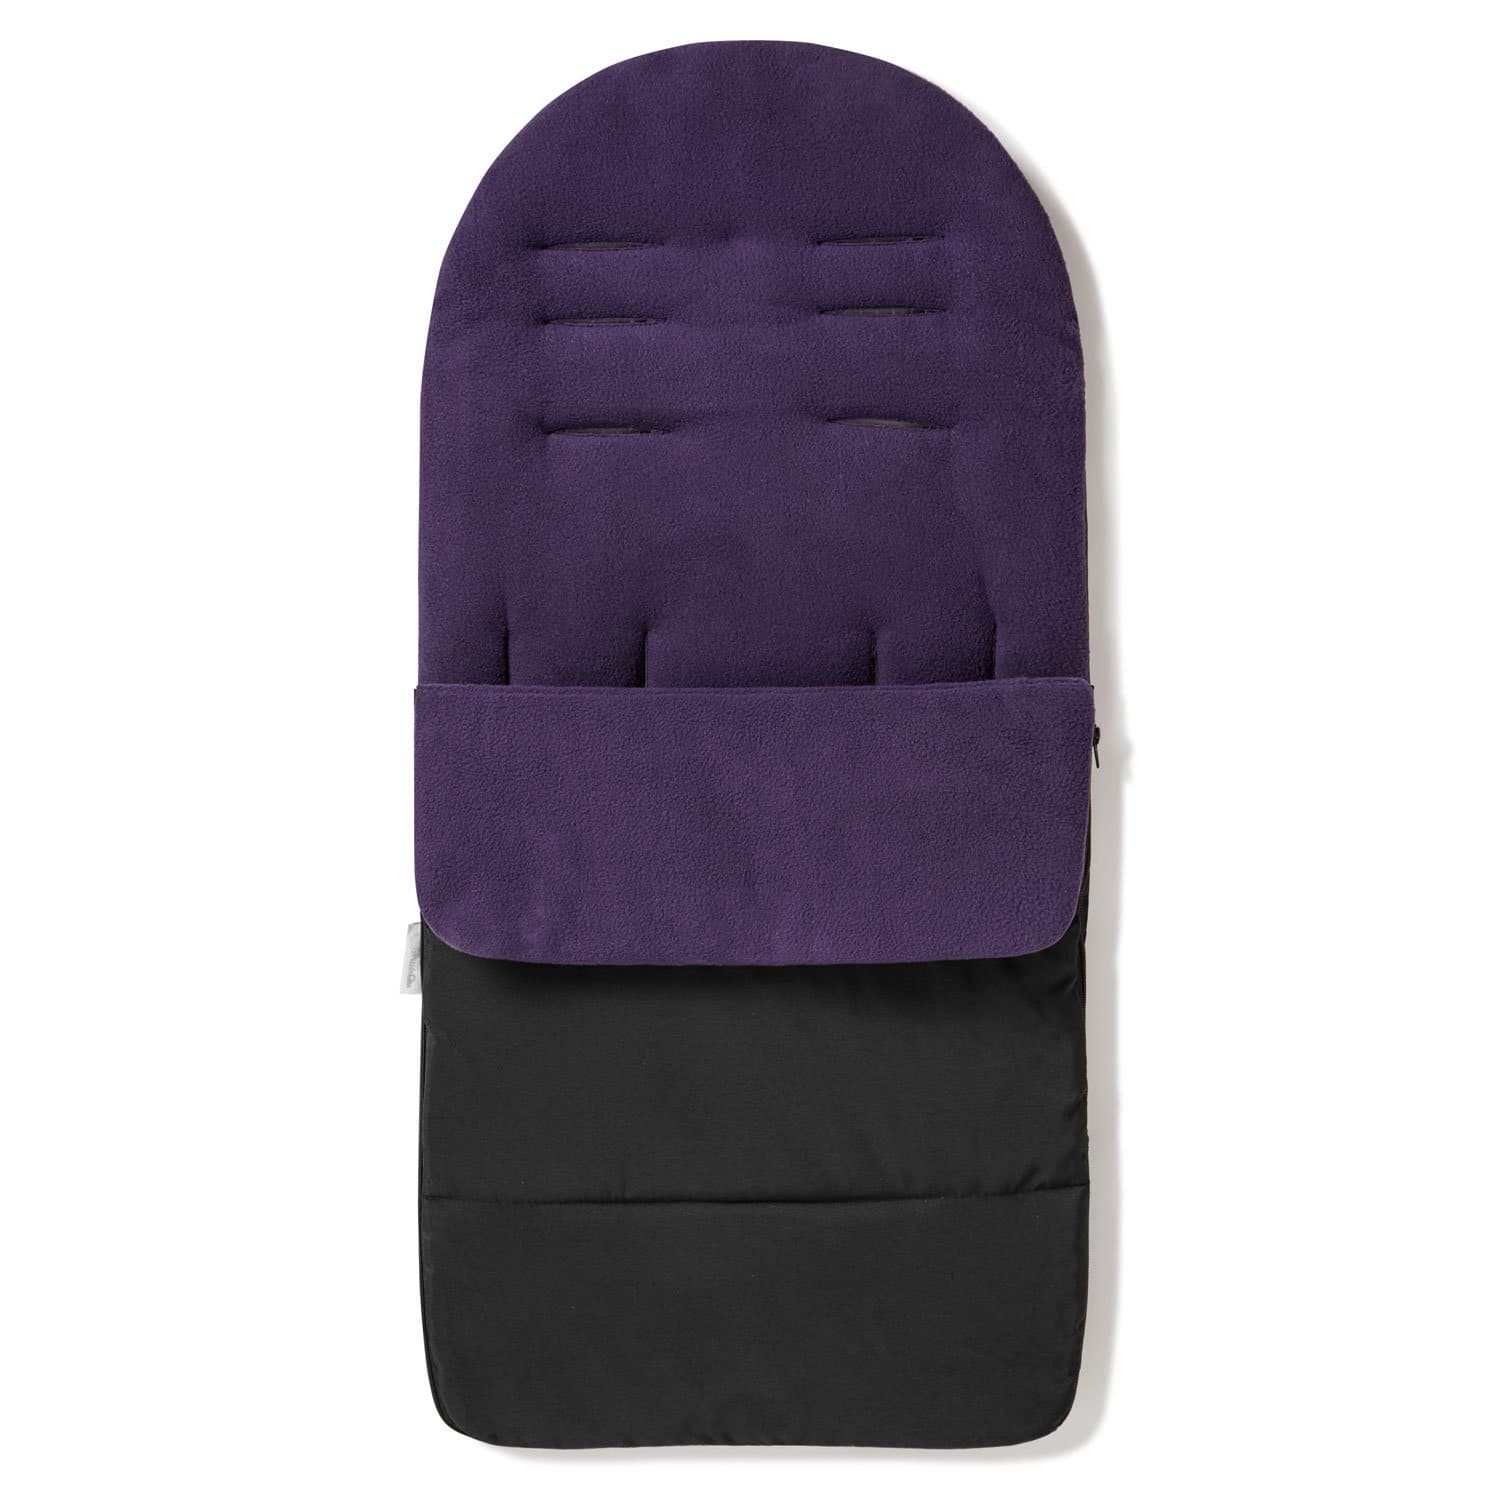 Premium Footmuff / Cosy Toes Compatible with Mothercare - Plum Purple / Fits All Models | For Your Little One